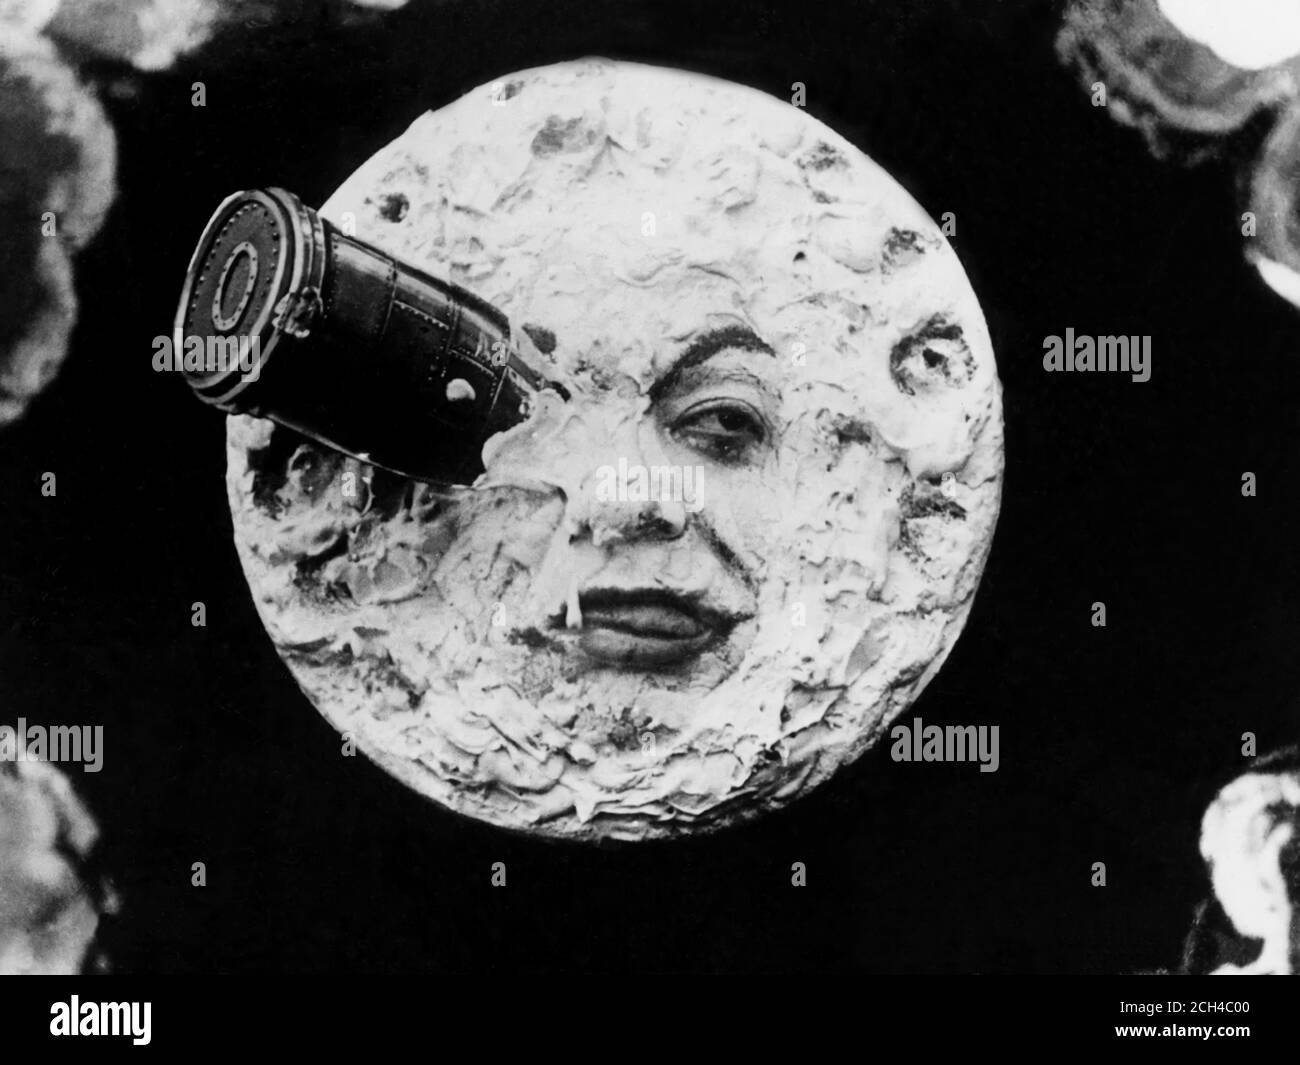 1902 , FRANCE : The movie A TRIP TO THE MOON (  LE VOYAGE DANS LA LUNE - Viaggio nella Luna ) by celebrated french movie director GEORGES MELIES ( Méliès , 1861 - 1938 ). Stop-frame from the movie cell . - CINEMA MUTO - SILENT MOVIE - FILM - LUNA - FANTASCIENZA - OCCHIO - EYE - SCIENCE FICTION - navicella spaziale --- Archivio GBB Stock Photo